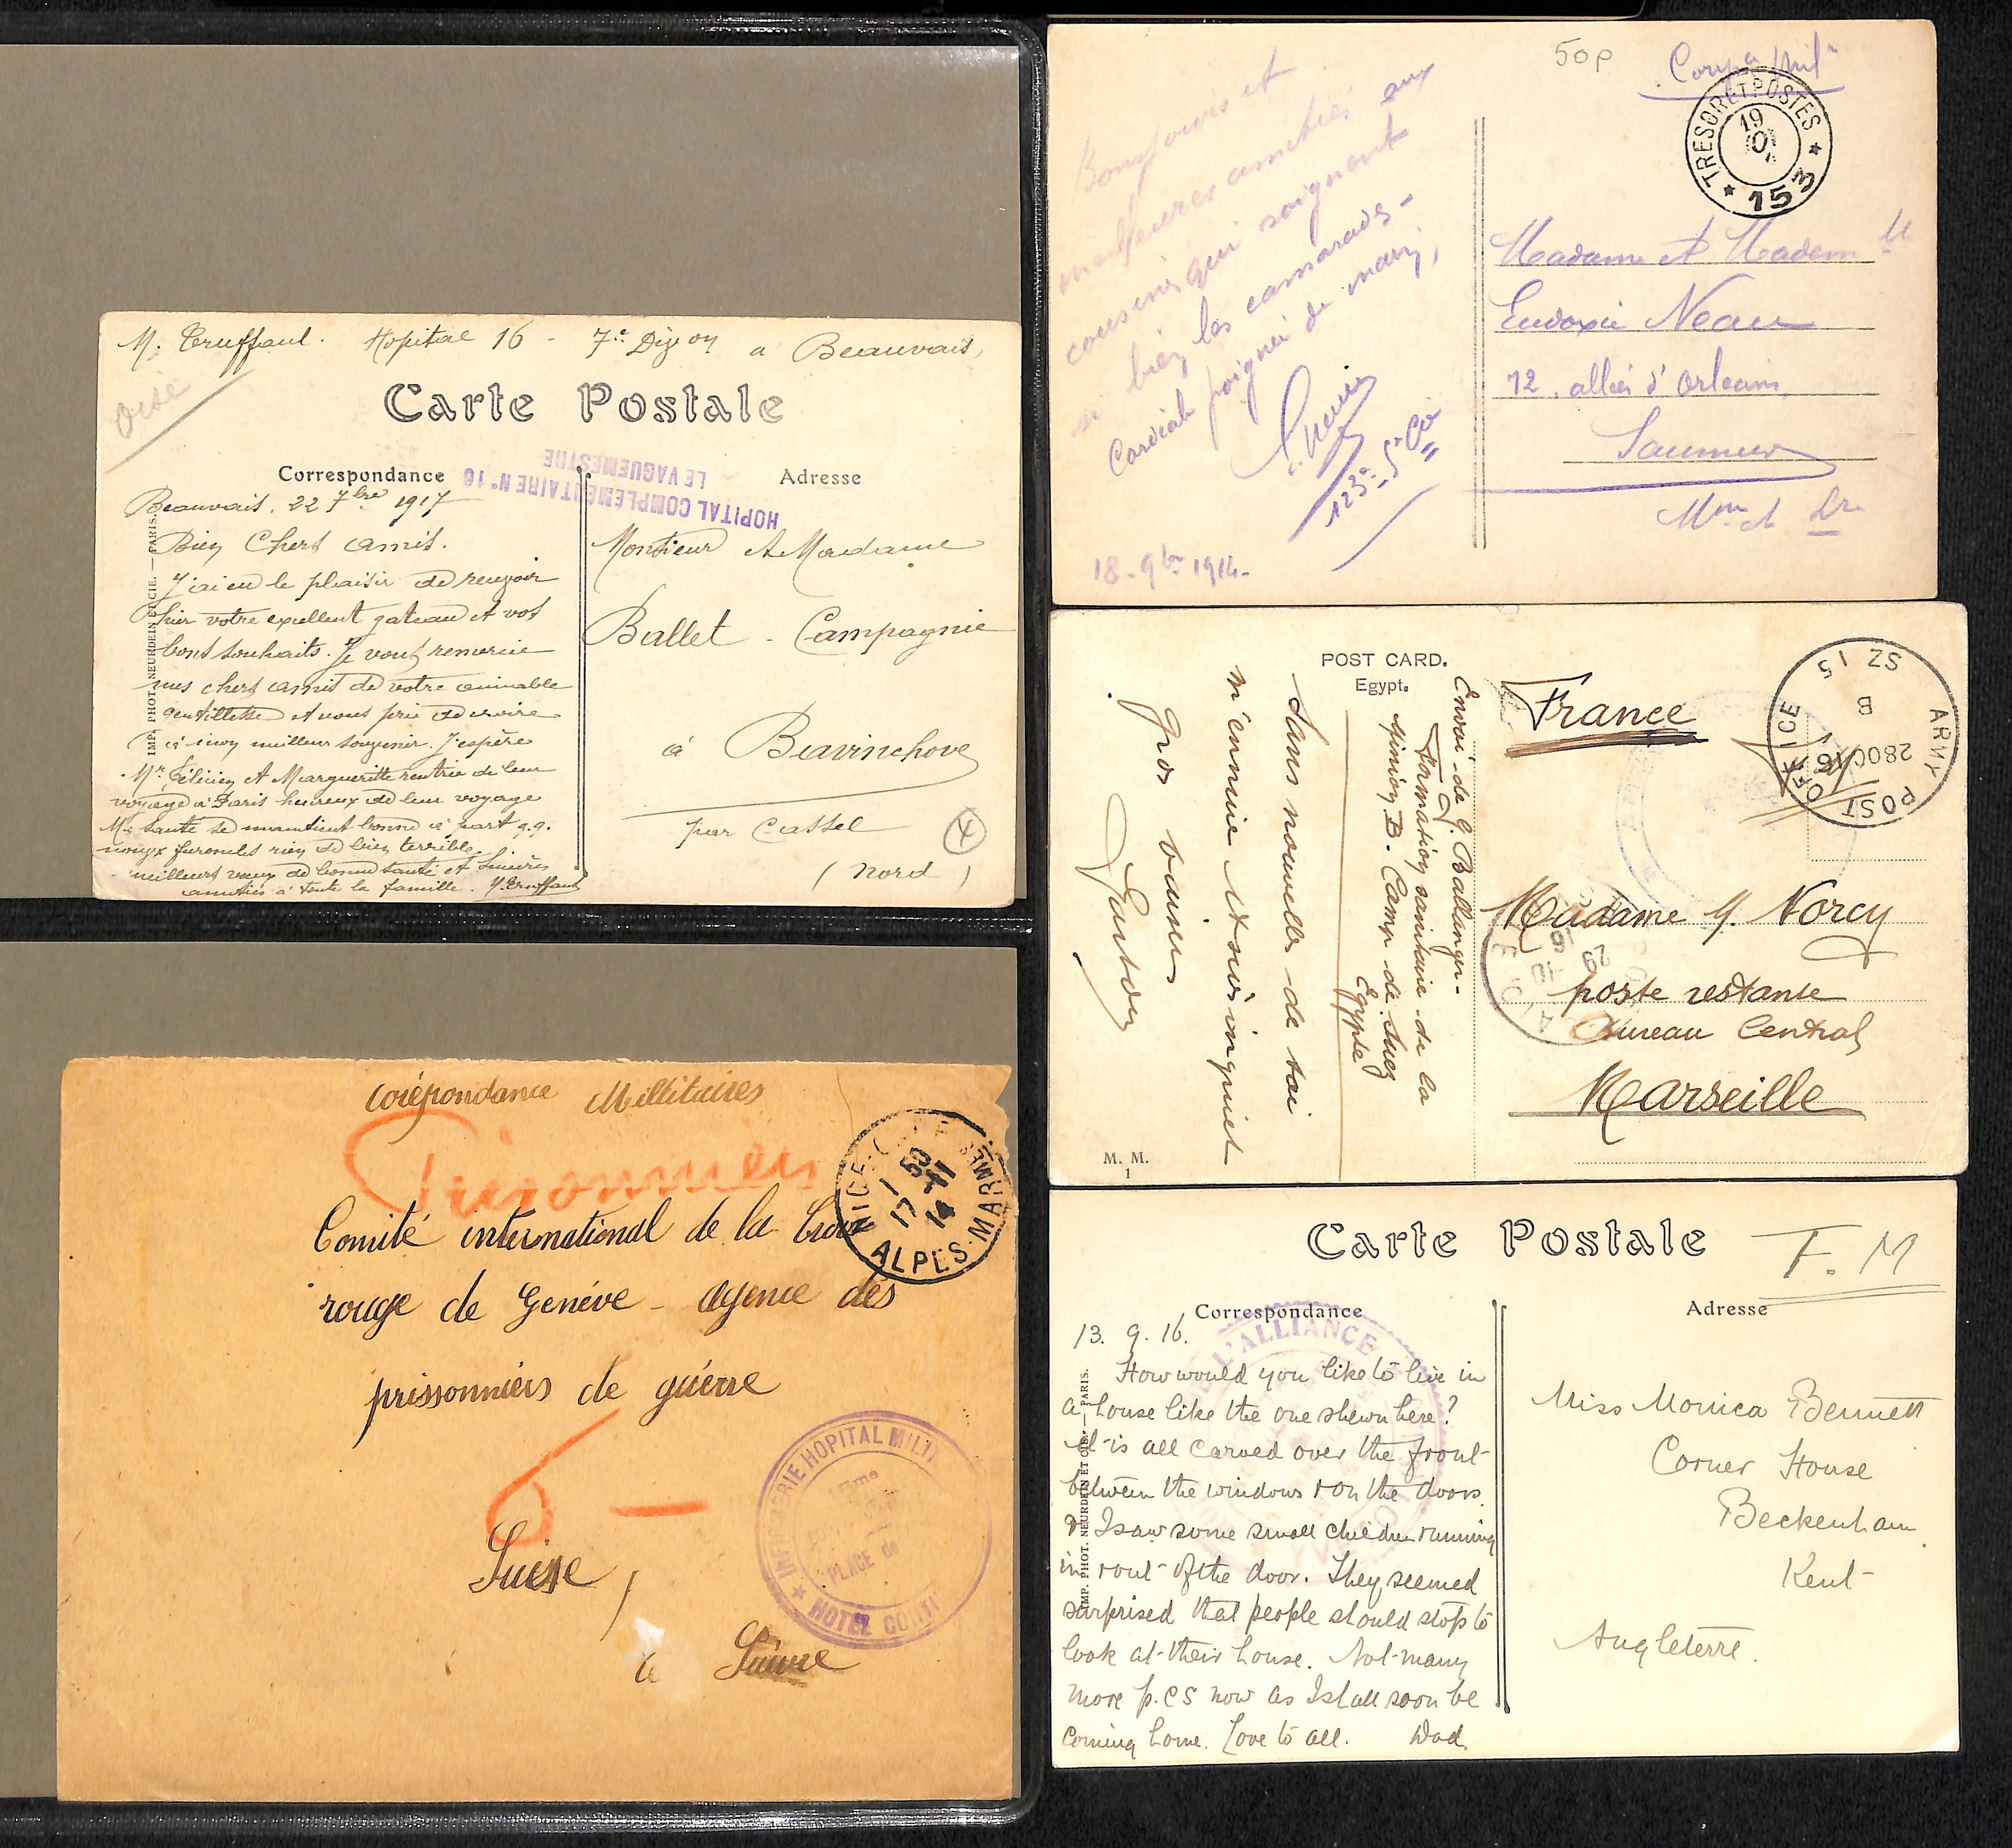 France/Italy. 1914-18 Covers and cards from soldiers in hospitals in France (26) or Italy (5),